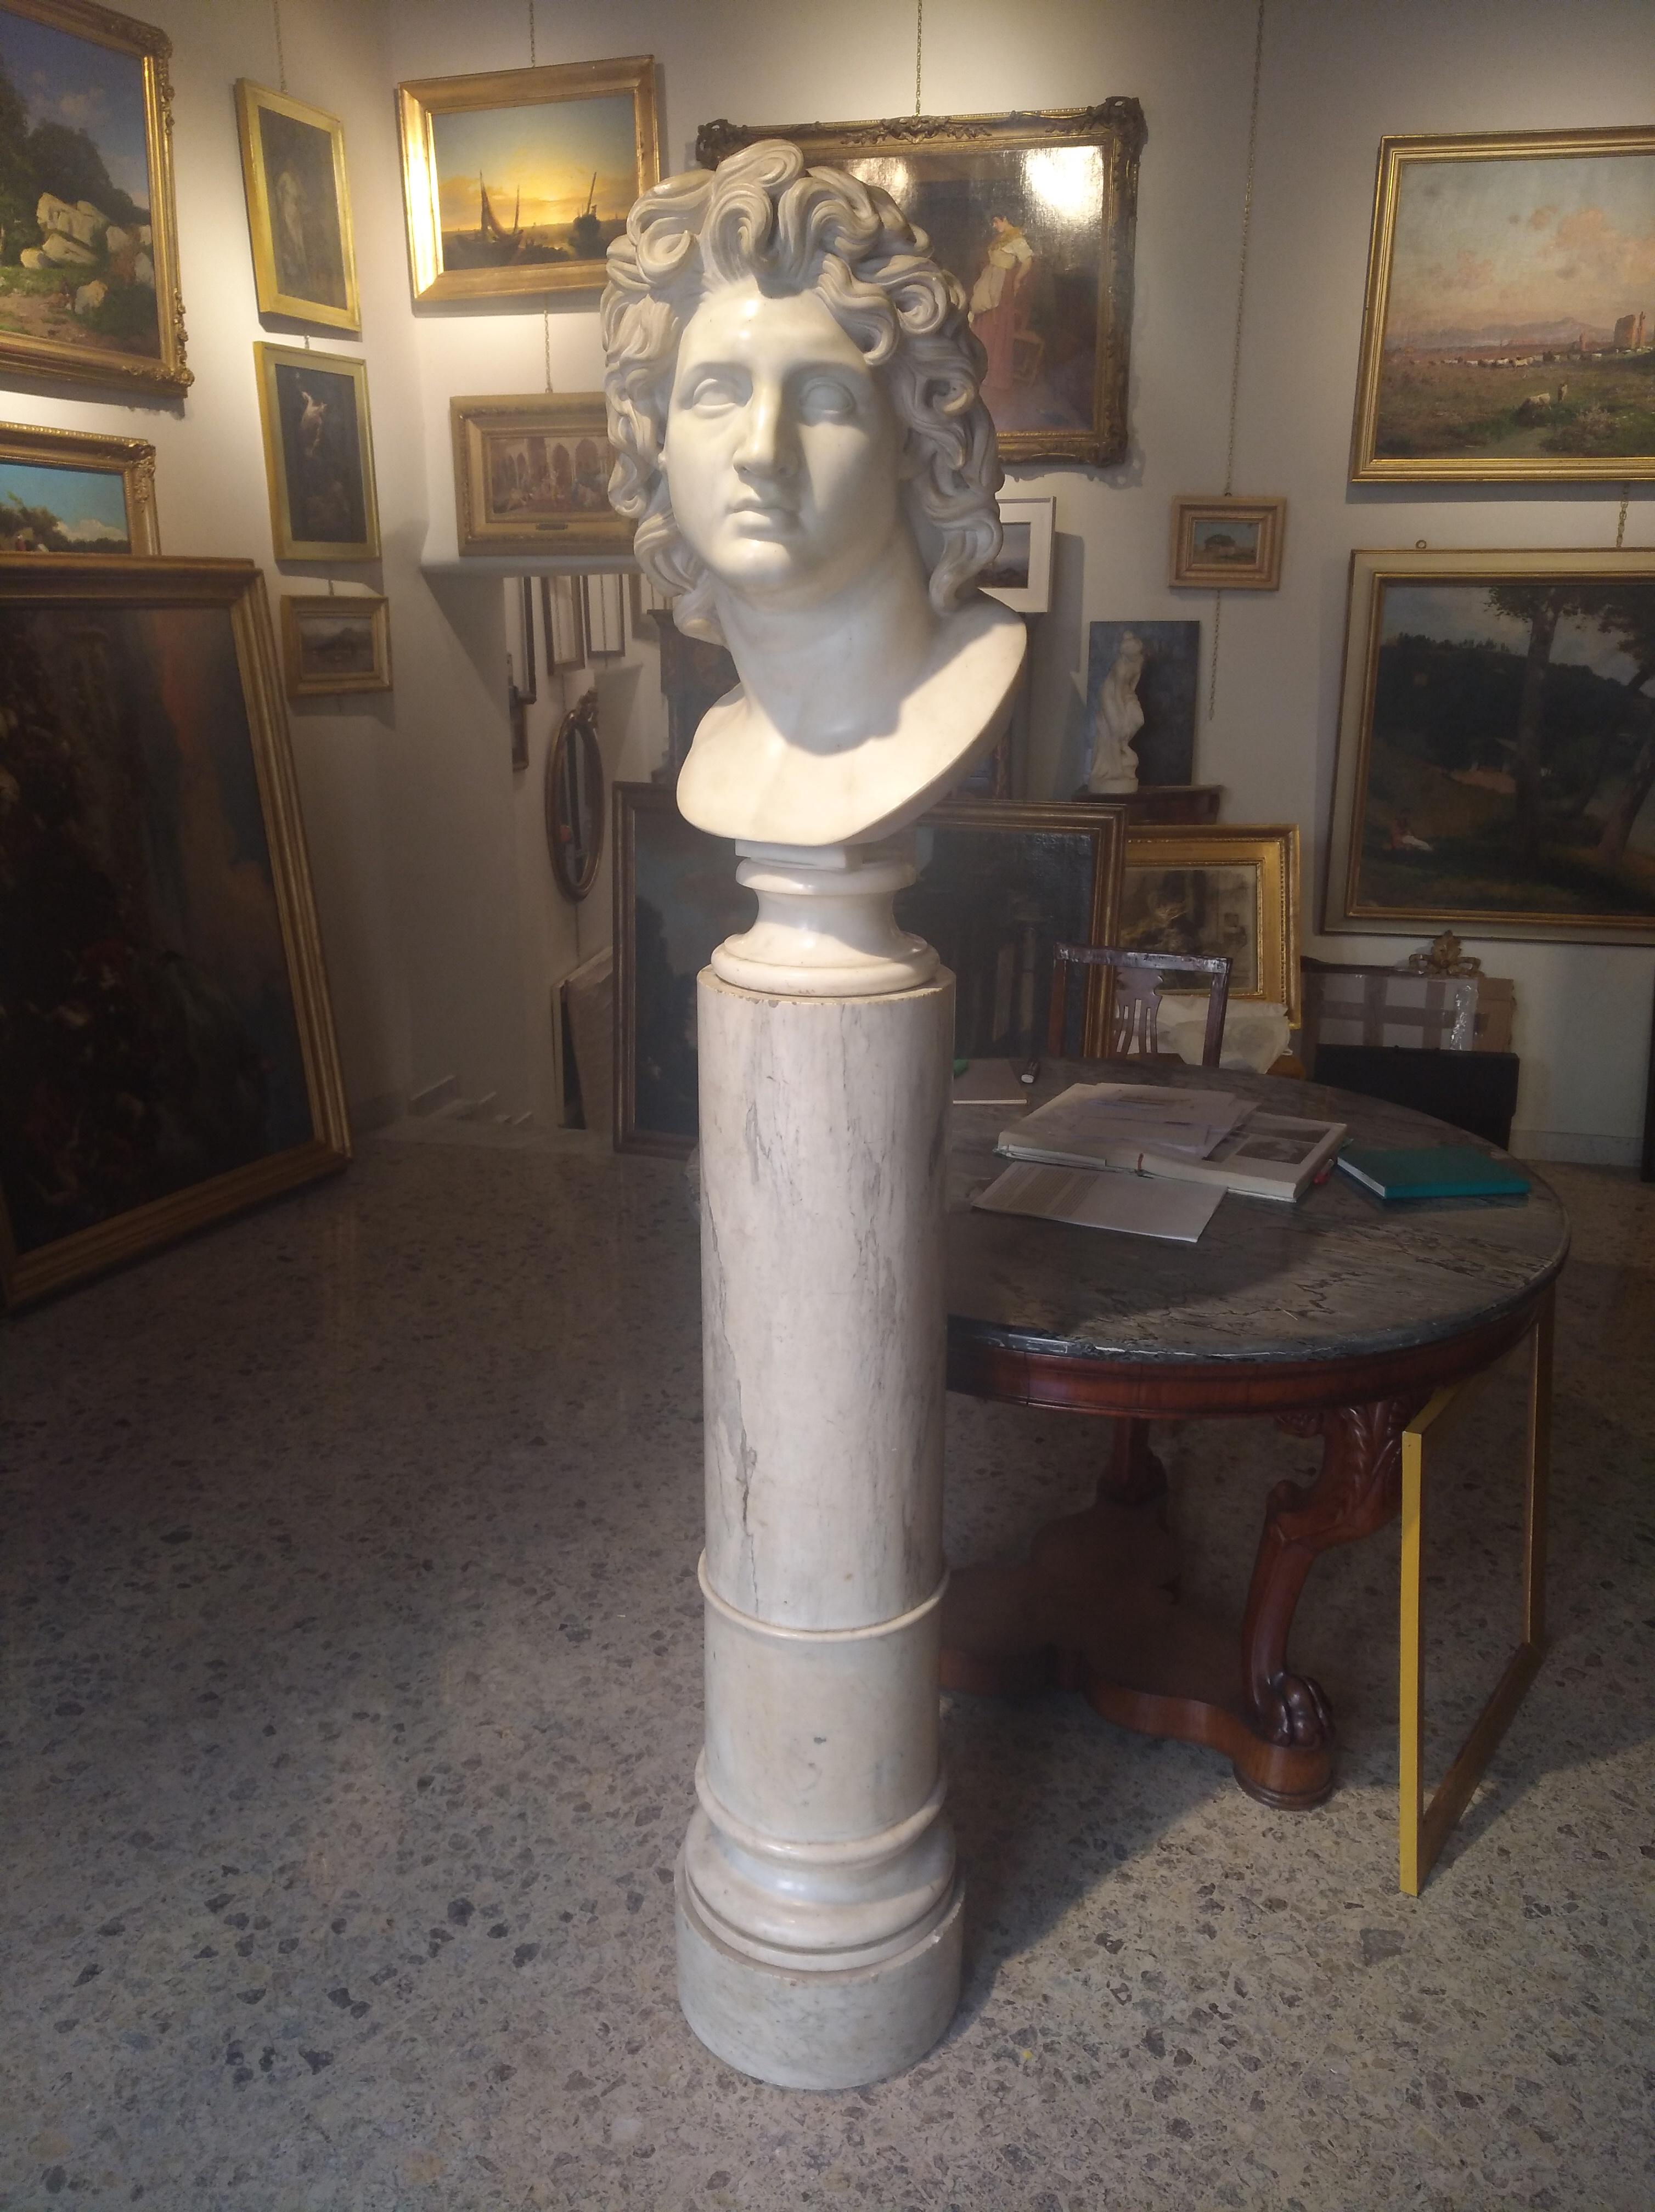 Carlo Albacini (1734-1813)
Alexander the Great
The marble column that supports the bust is original and is born together with the sculpture
Not signed but certified by the Expertise of Professor's Teresa Sacchi Lodispoto


Carlo Albacini was